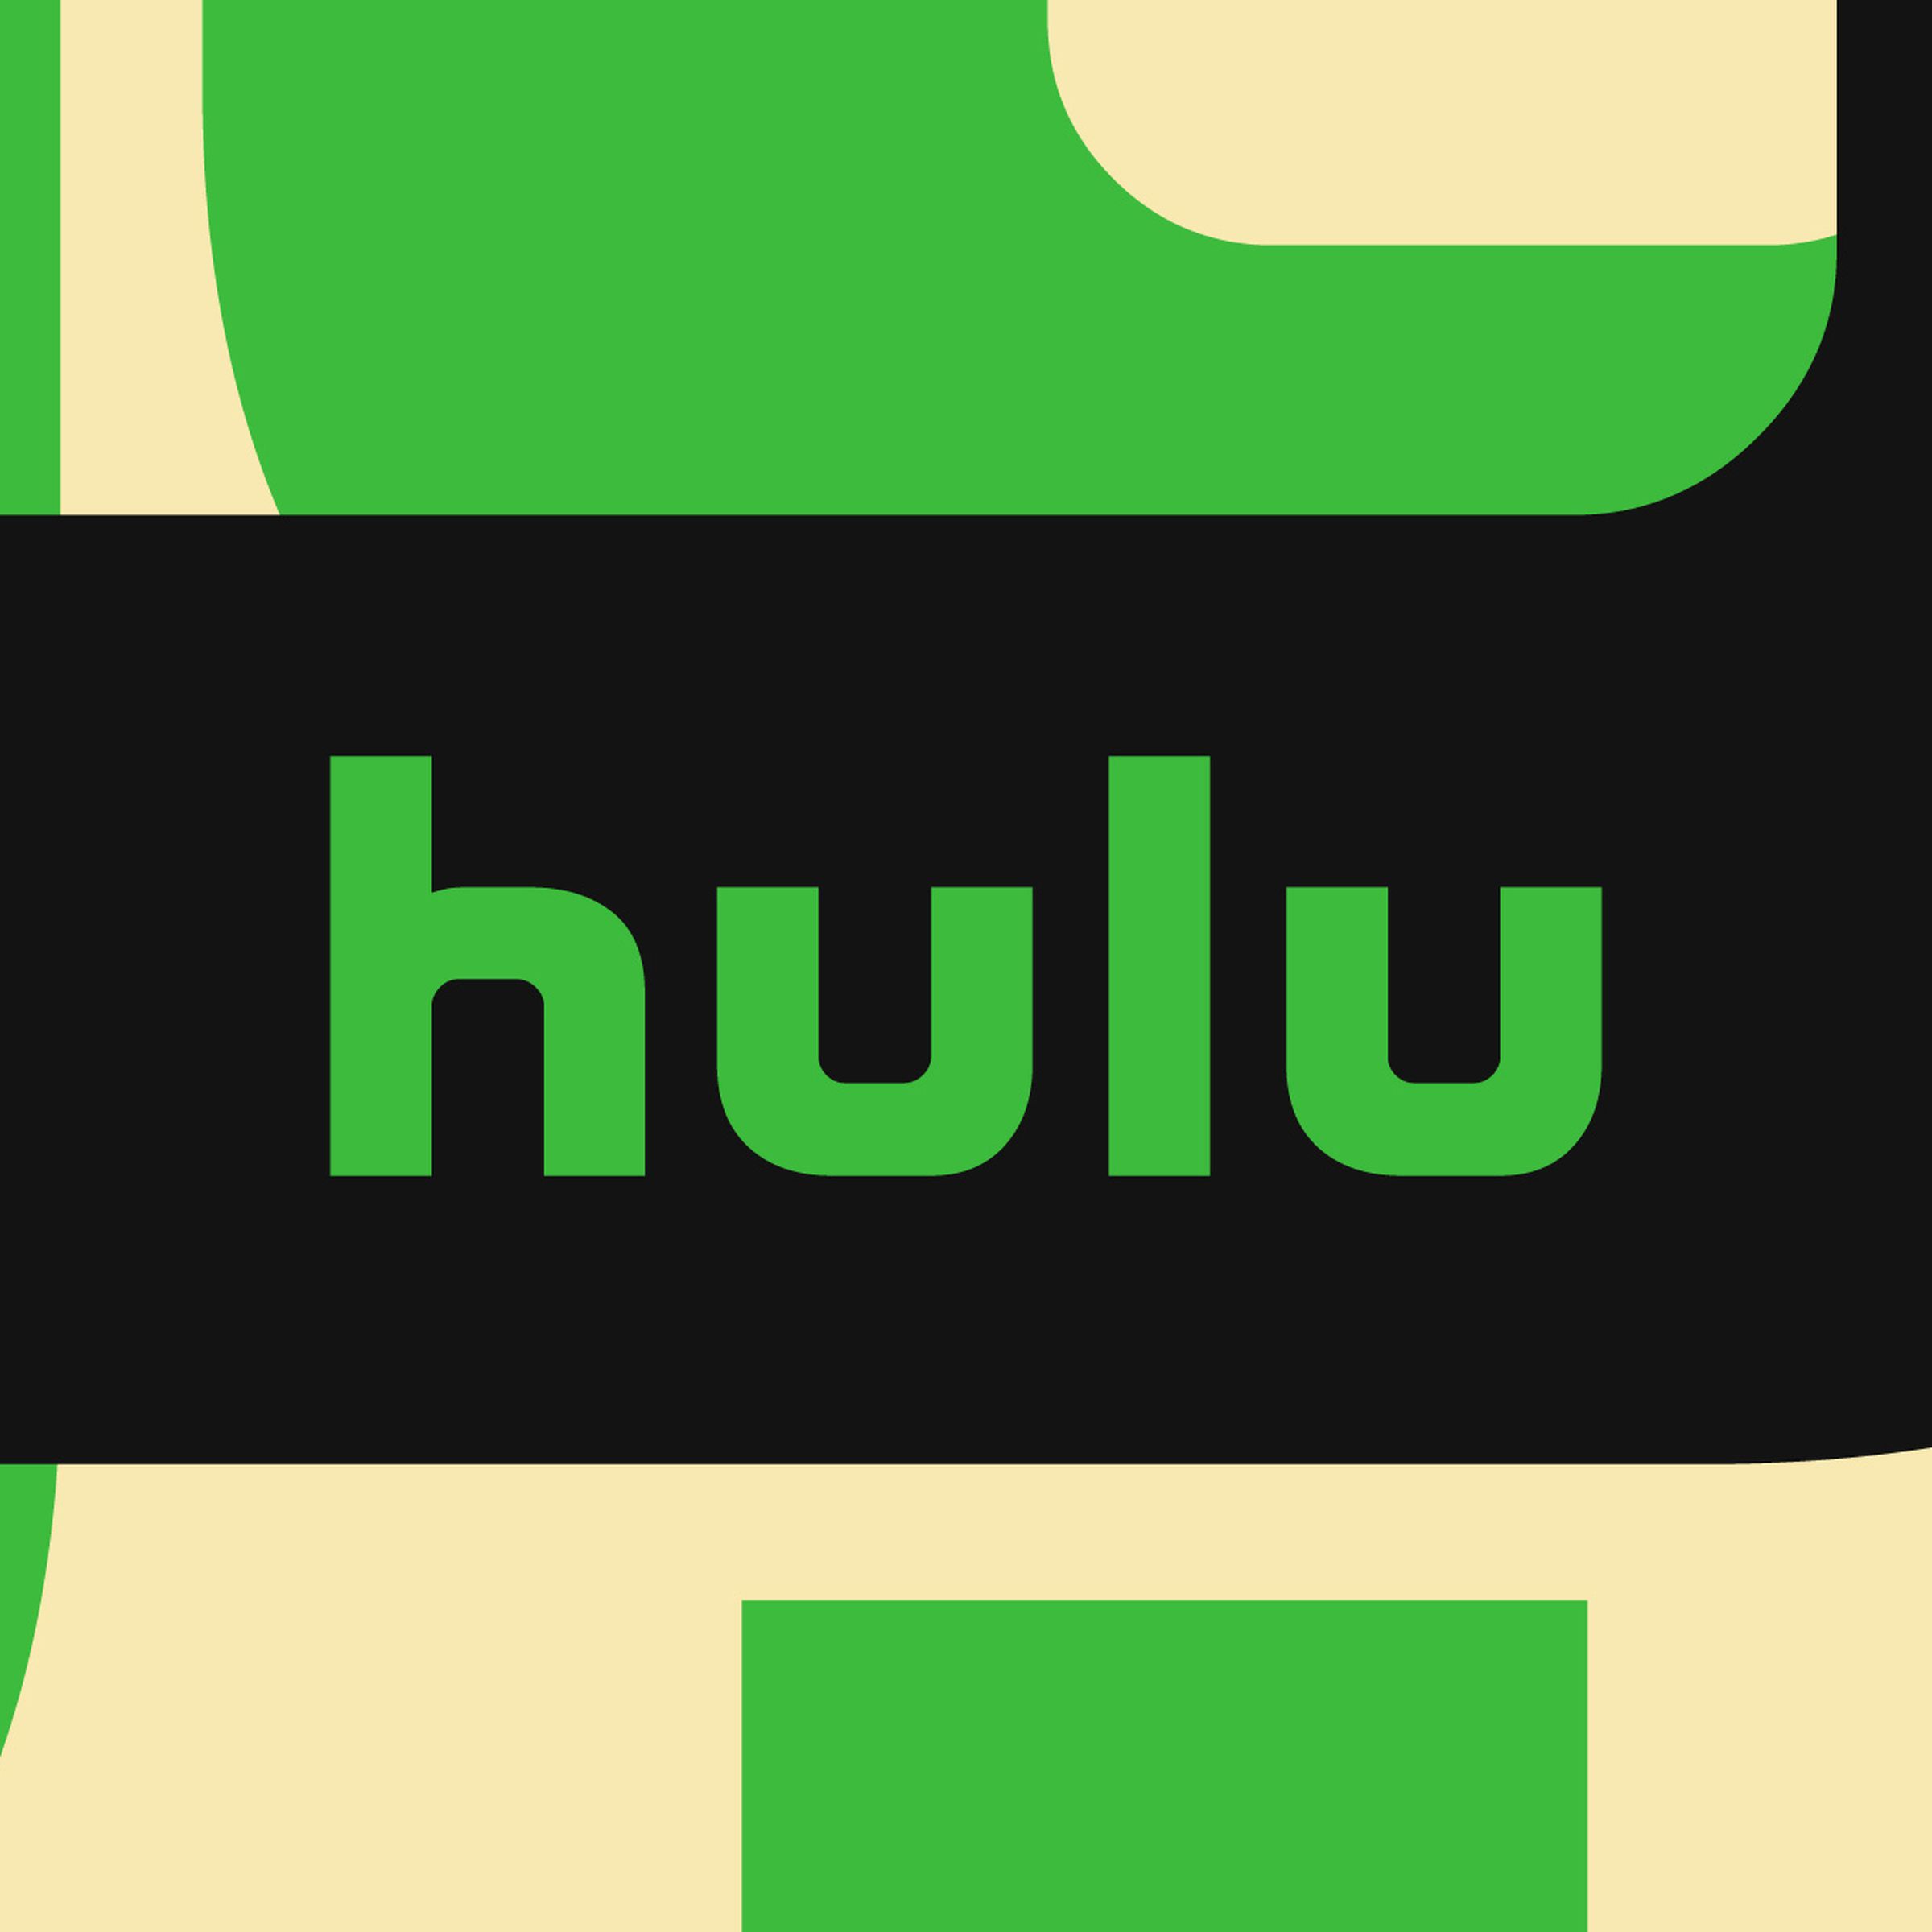 An image showing Hulu's logo on a abstract background